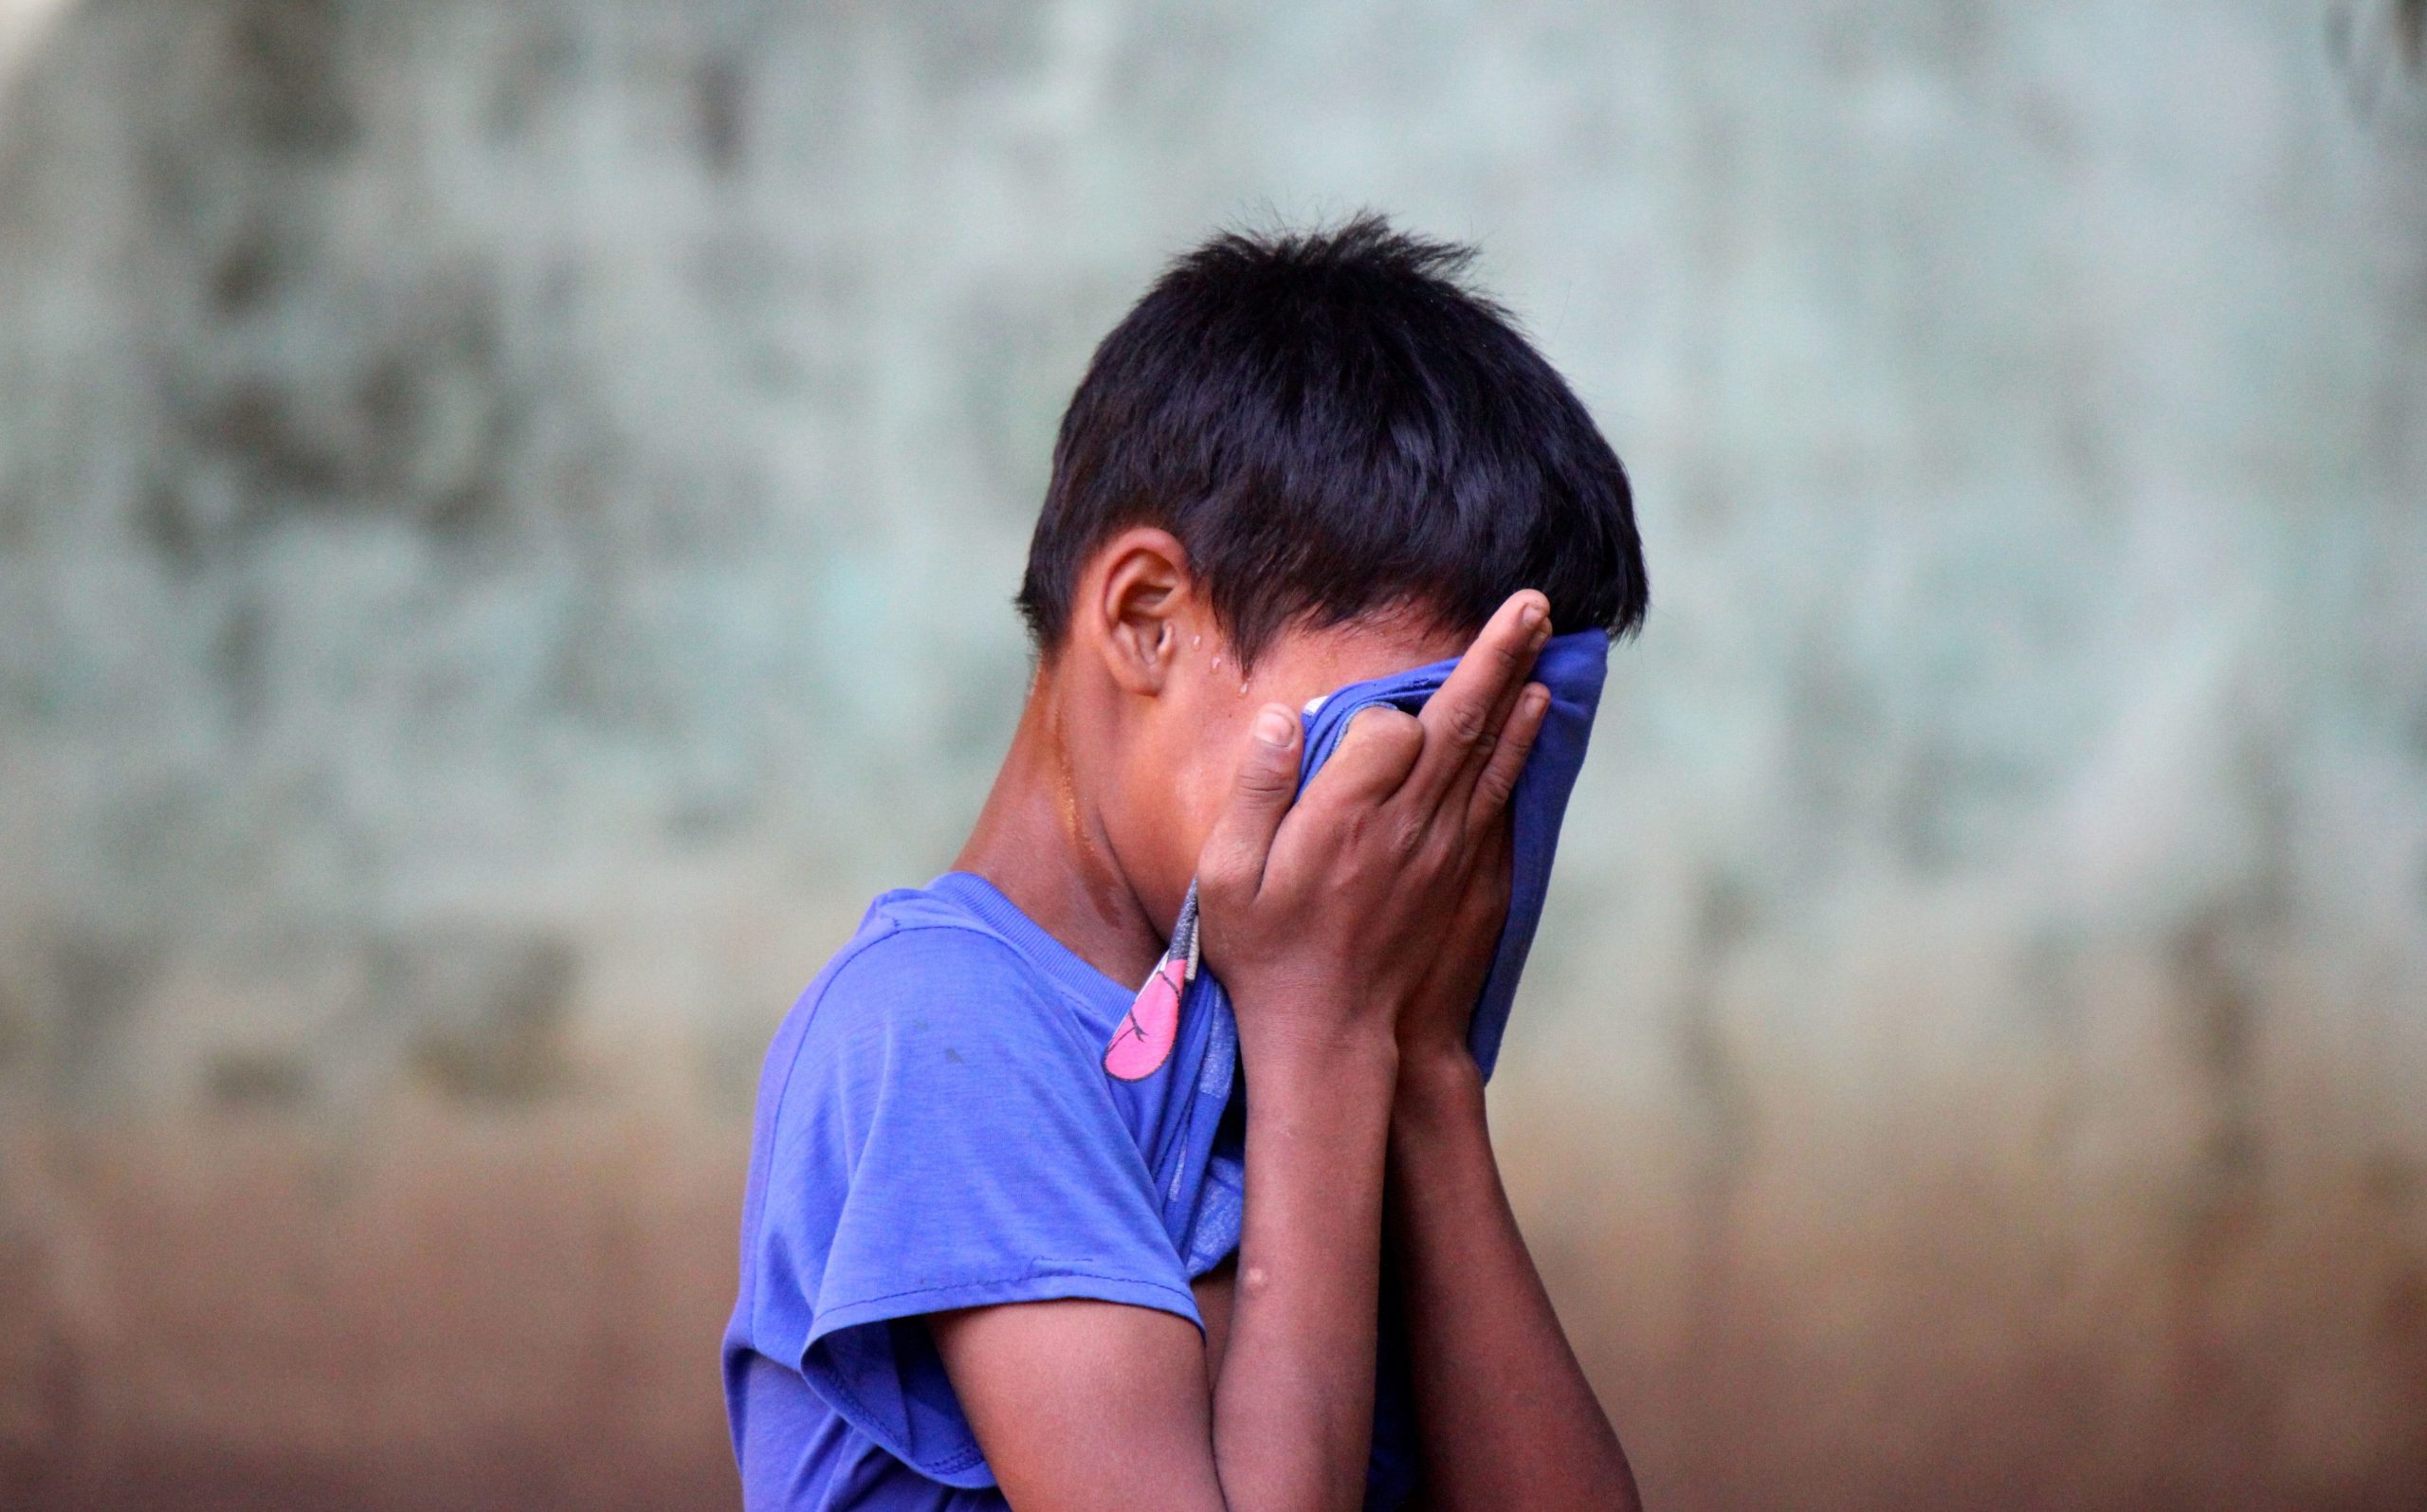 Children pay the price in Pakistan’s mass HIV outbreak